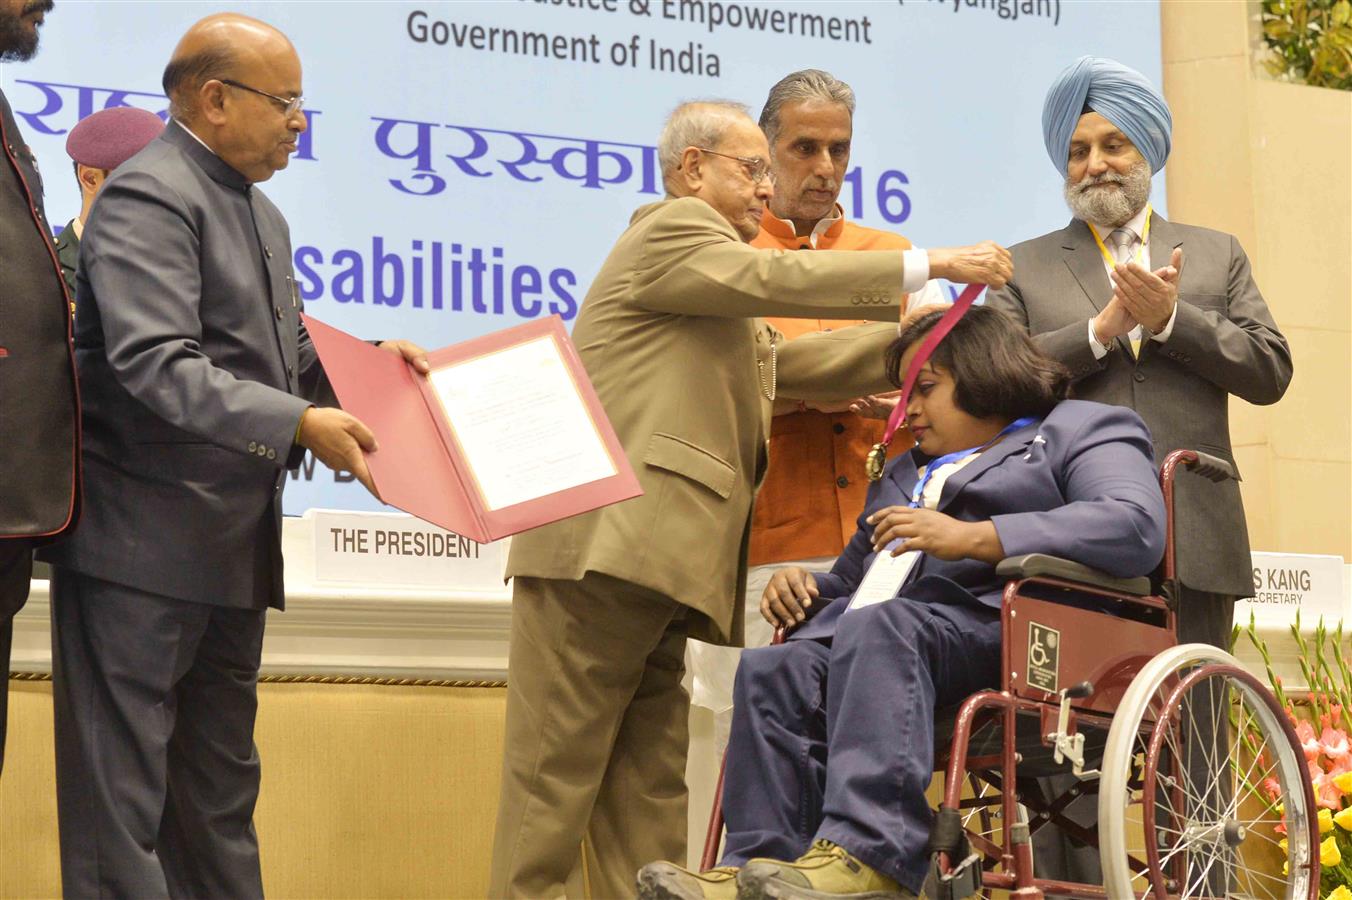  The President of India, Shri Pranab Mukherjee presenting the National Awards for the Empowerment of Persons with Disabilities (Divyangjan) in New Delhi on December 3, 2016 on the occasion of International Day of Disabled Persons.